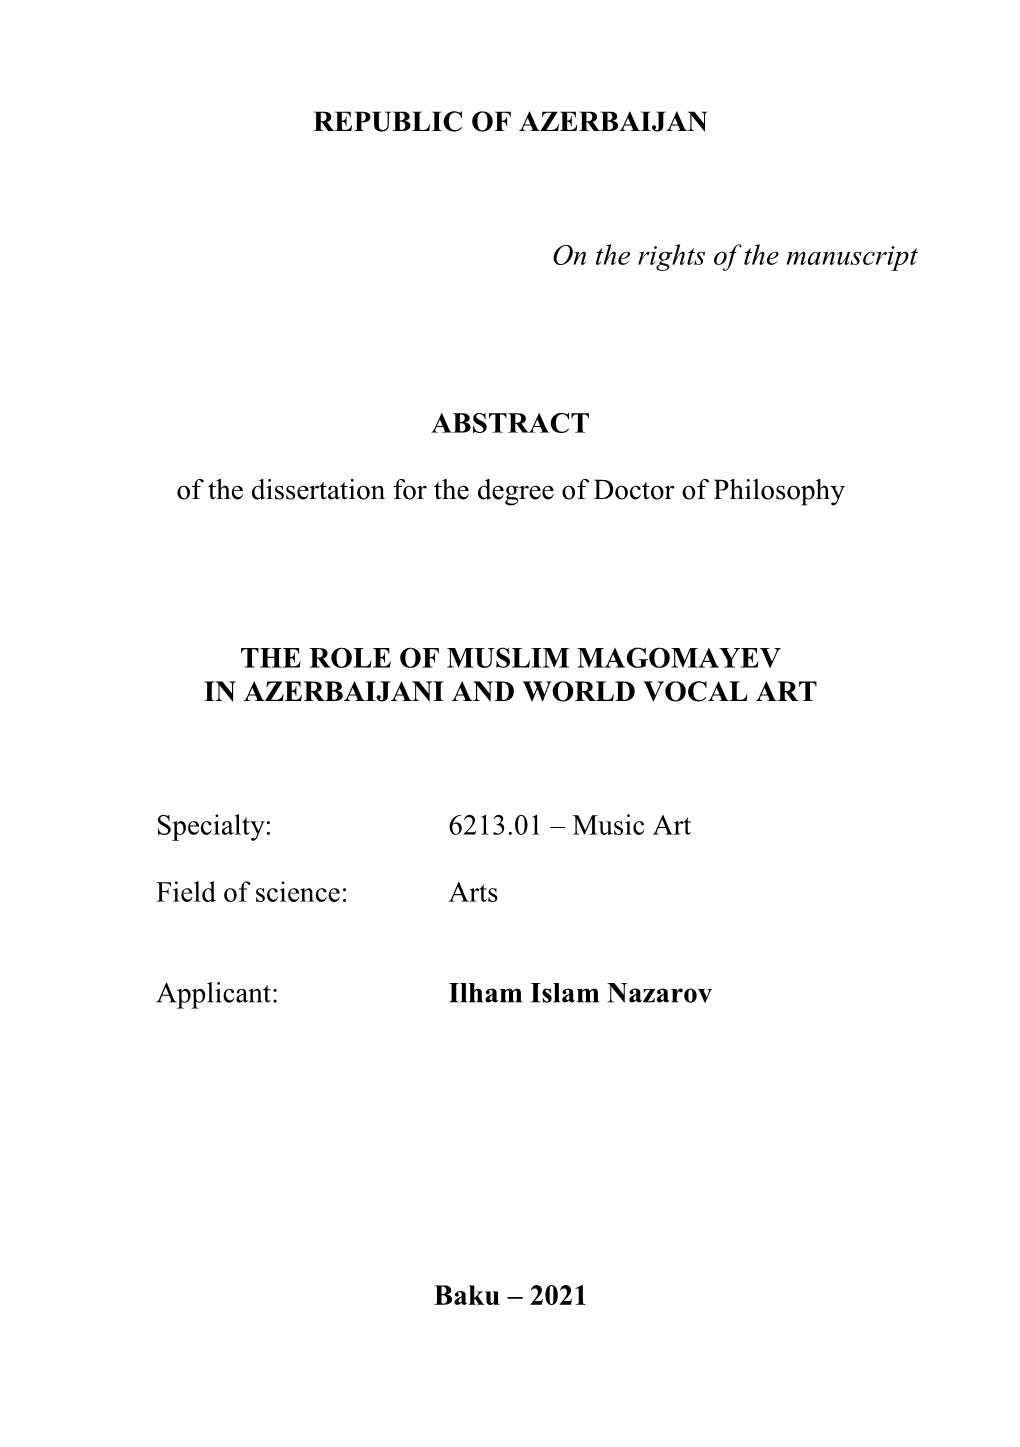 REPUBLIC of AZERBAIJAN on the Rights of the Manuscript ABSTRACT of the Dissertation for the Degree of Doctor of Philosophy the R